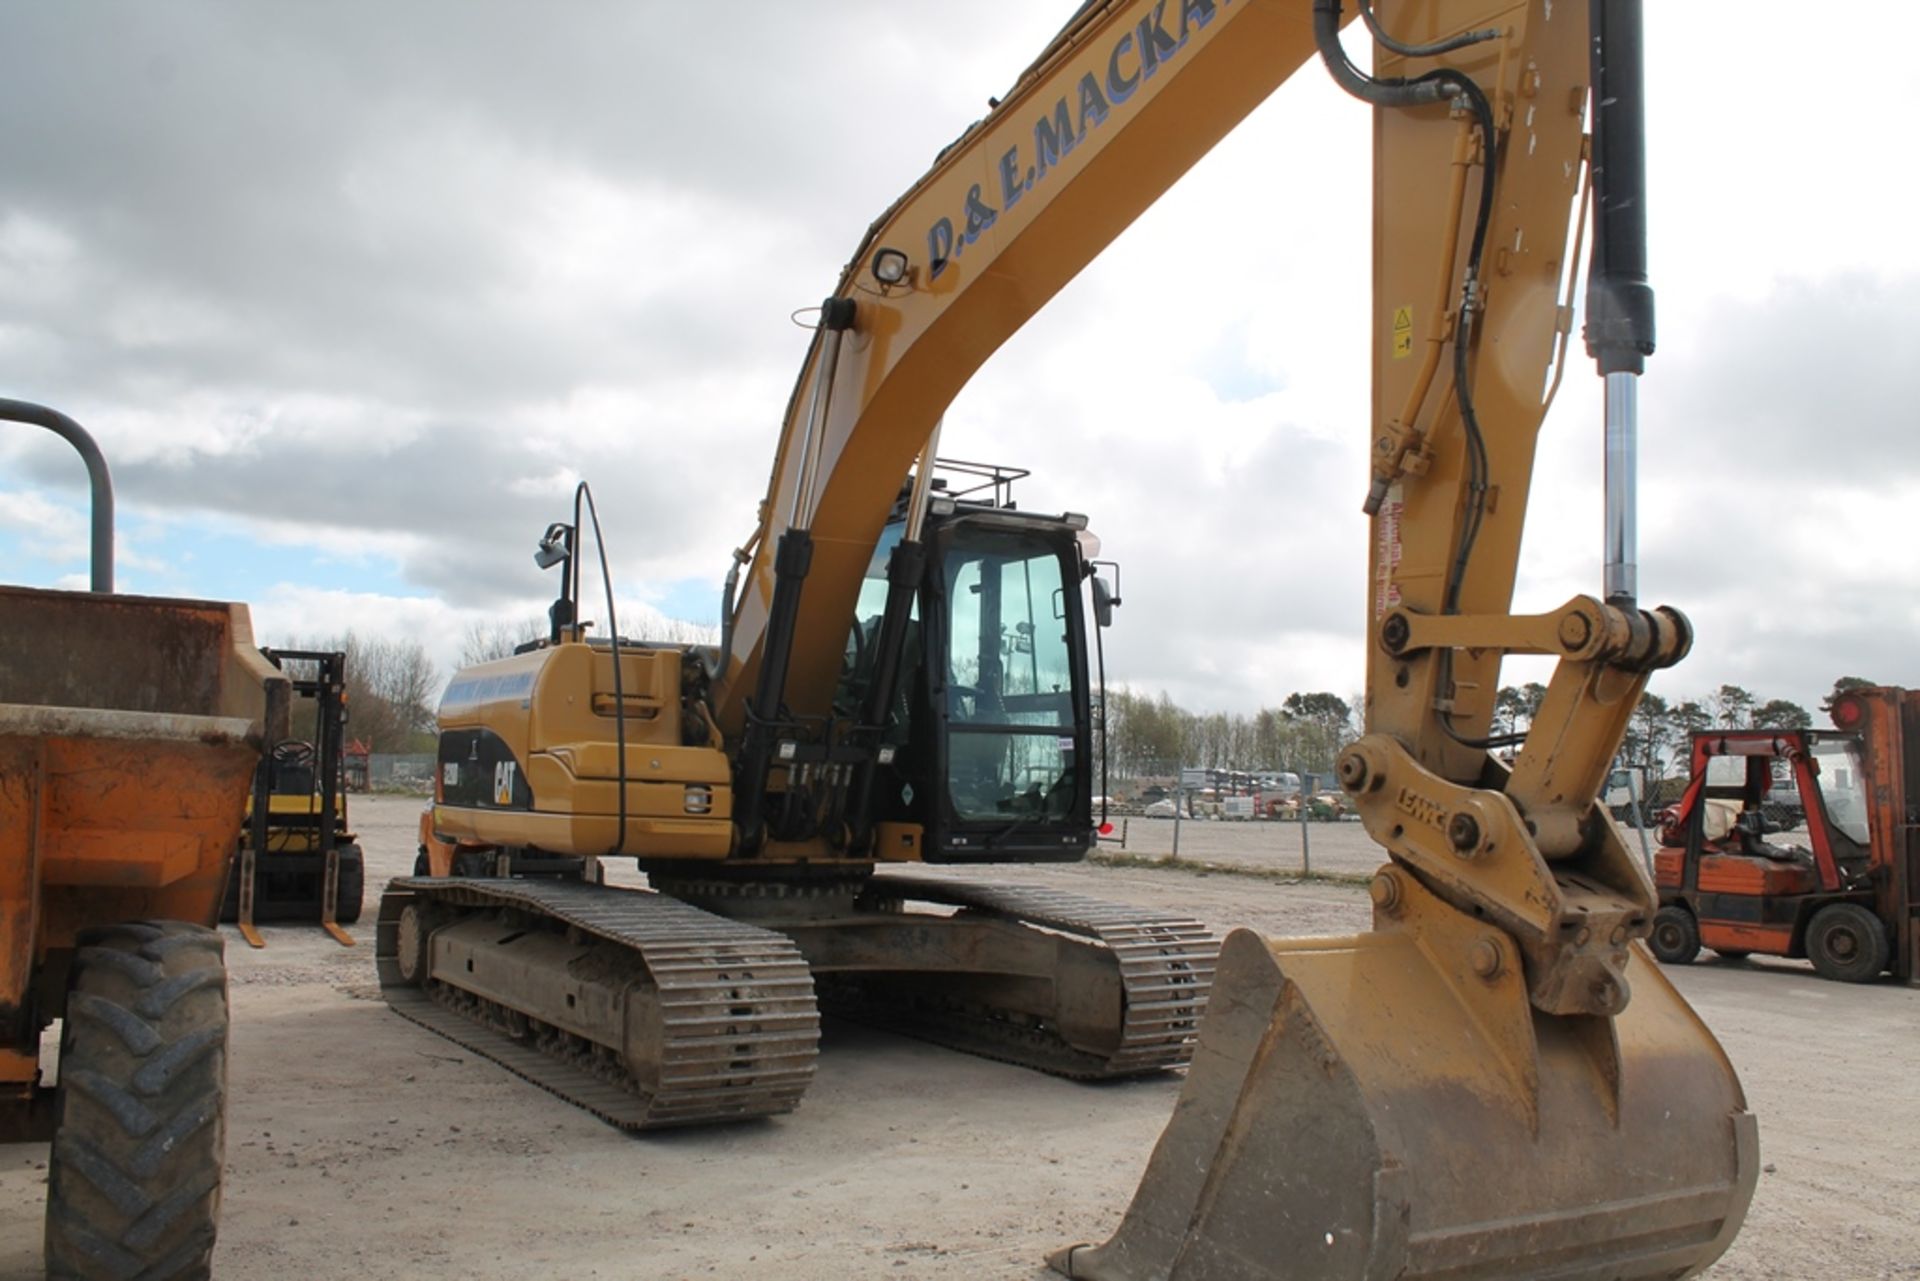 CATERPILLAR 320DL, NOV- 2010, 9108HRS, New tracks & sprockets fitted March 2016, PLUS VAT, , H - Image 8 of 9